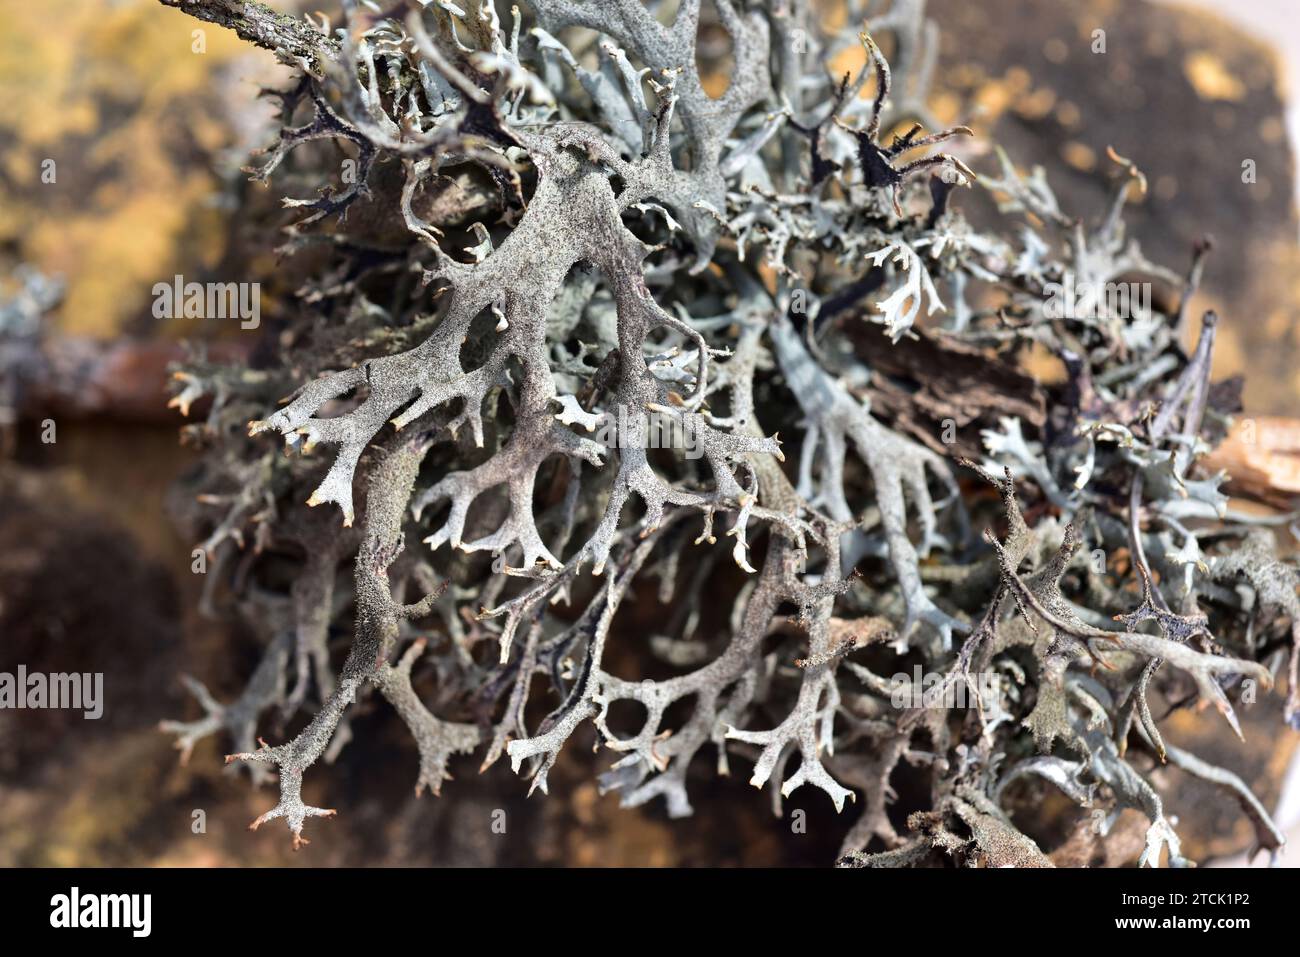 Pseudevernia furfuracea is a fruticose lichen that grows on bark tree. This photo was taken in La Cerdanya, Girona province, Catalonia, Spain. Stock Photo